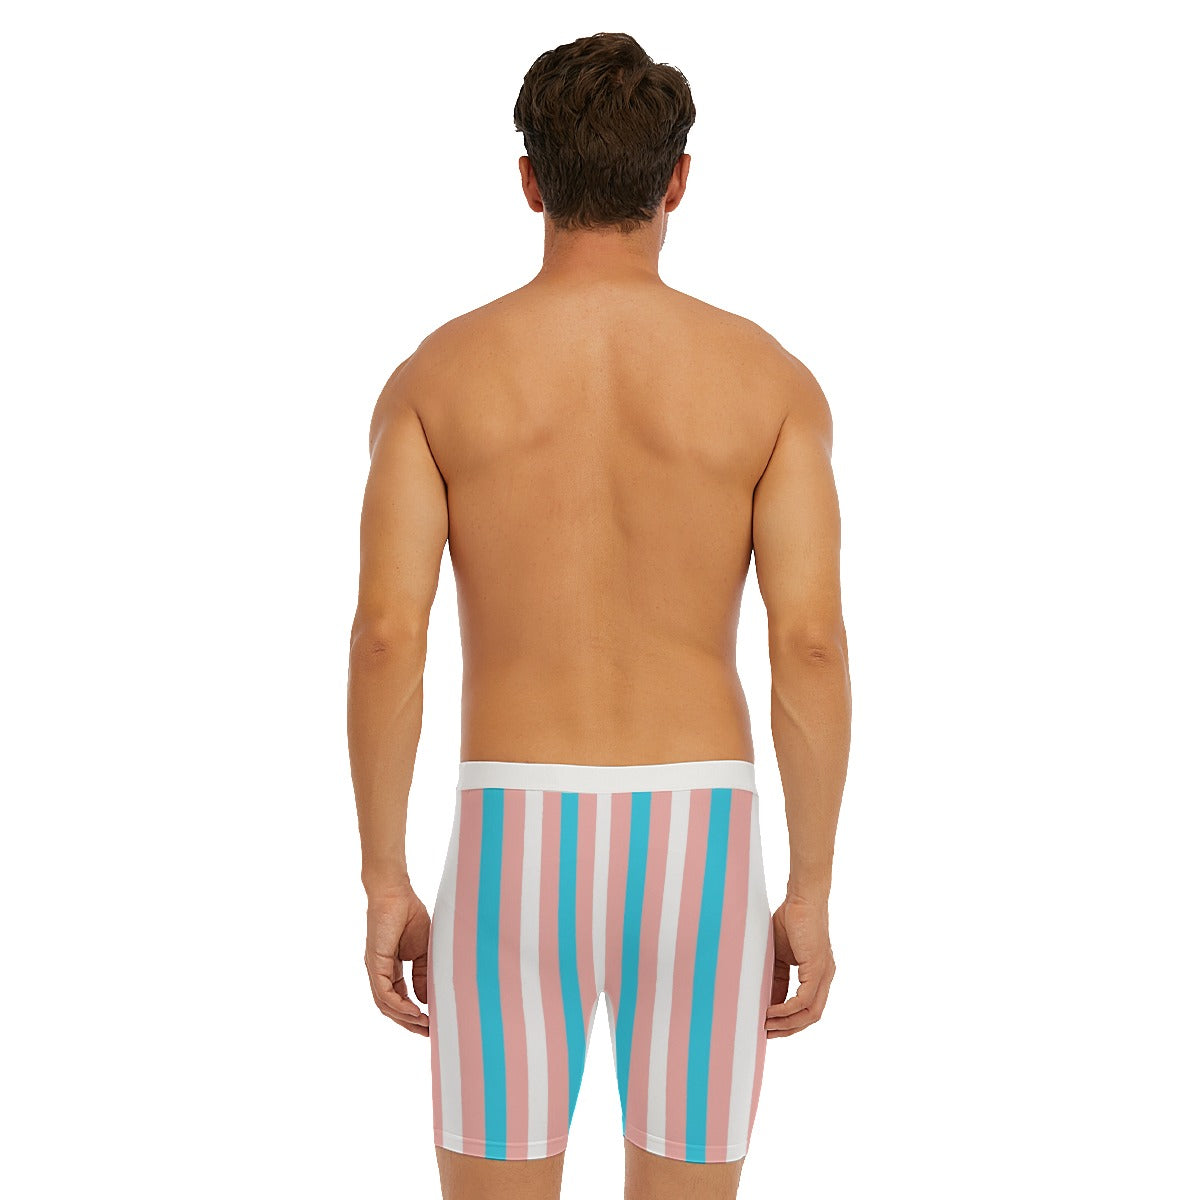 Trans Coloured Pride Candy Striped White Boyfriend Athletic Style Long Boxers